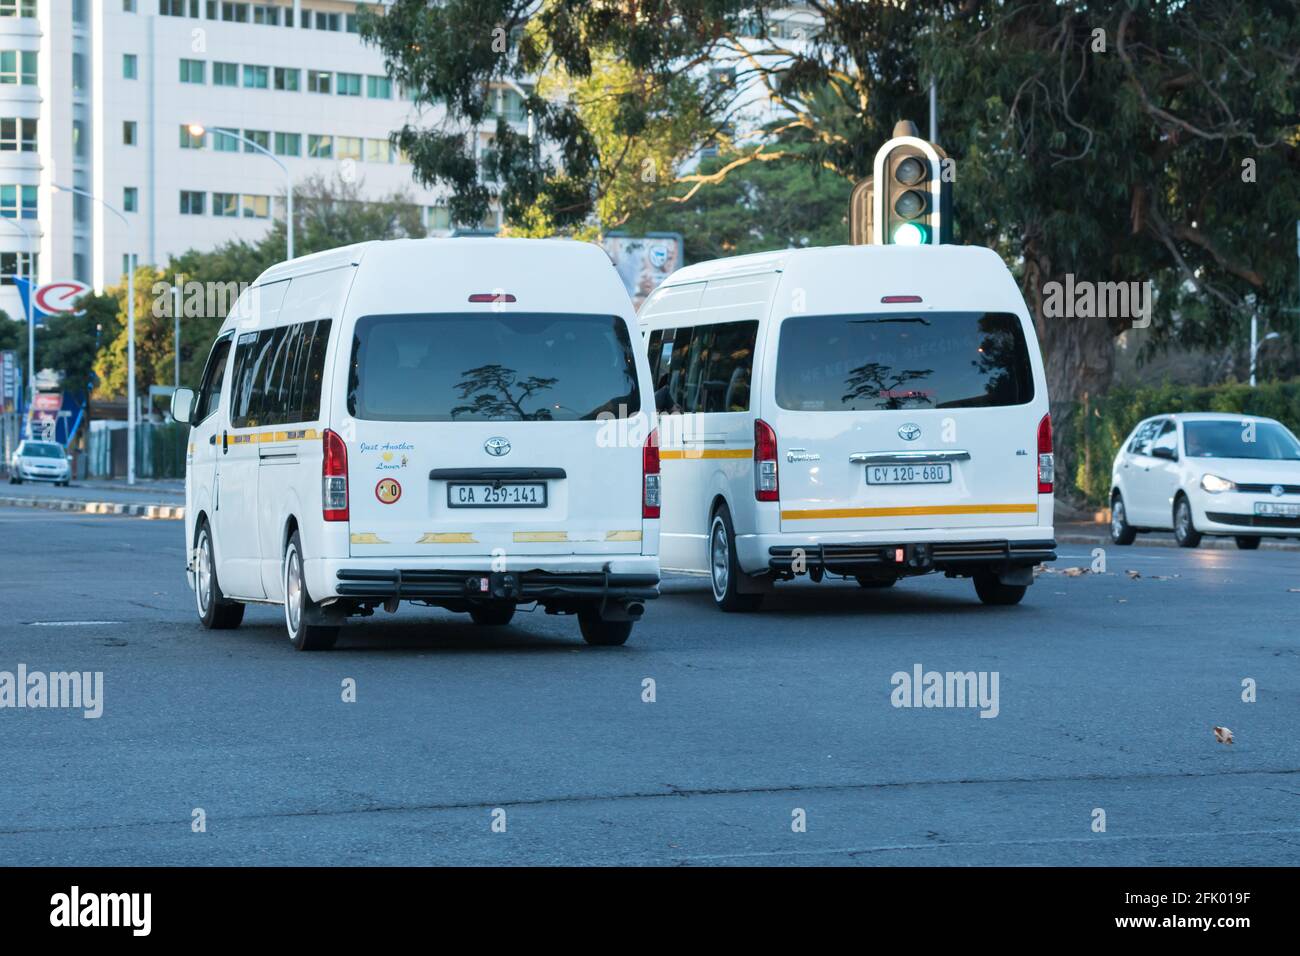 public transport, taxis in a road on a city street in Cape Town, South Africa Stock Photo